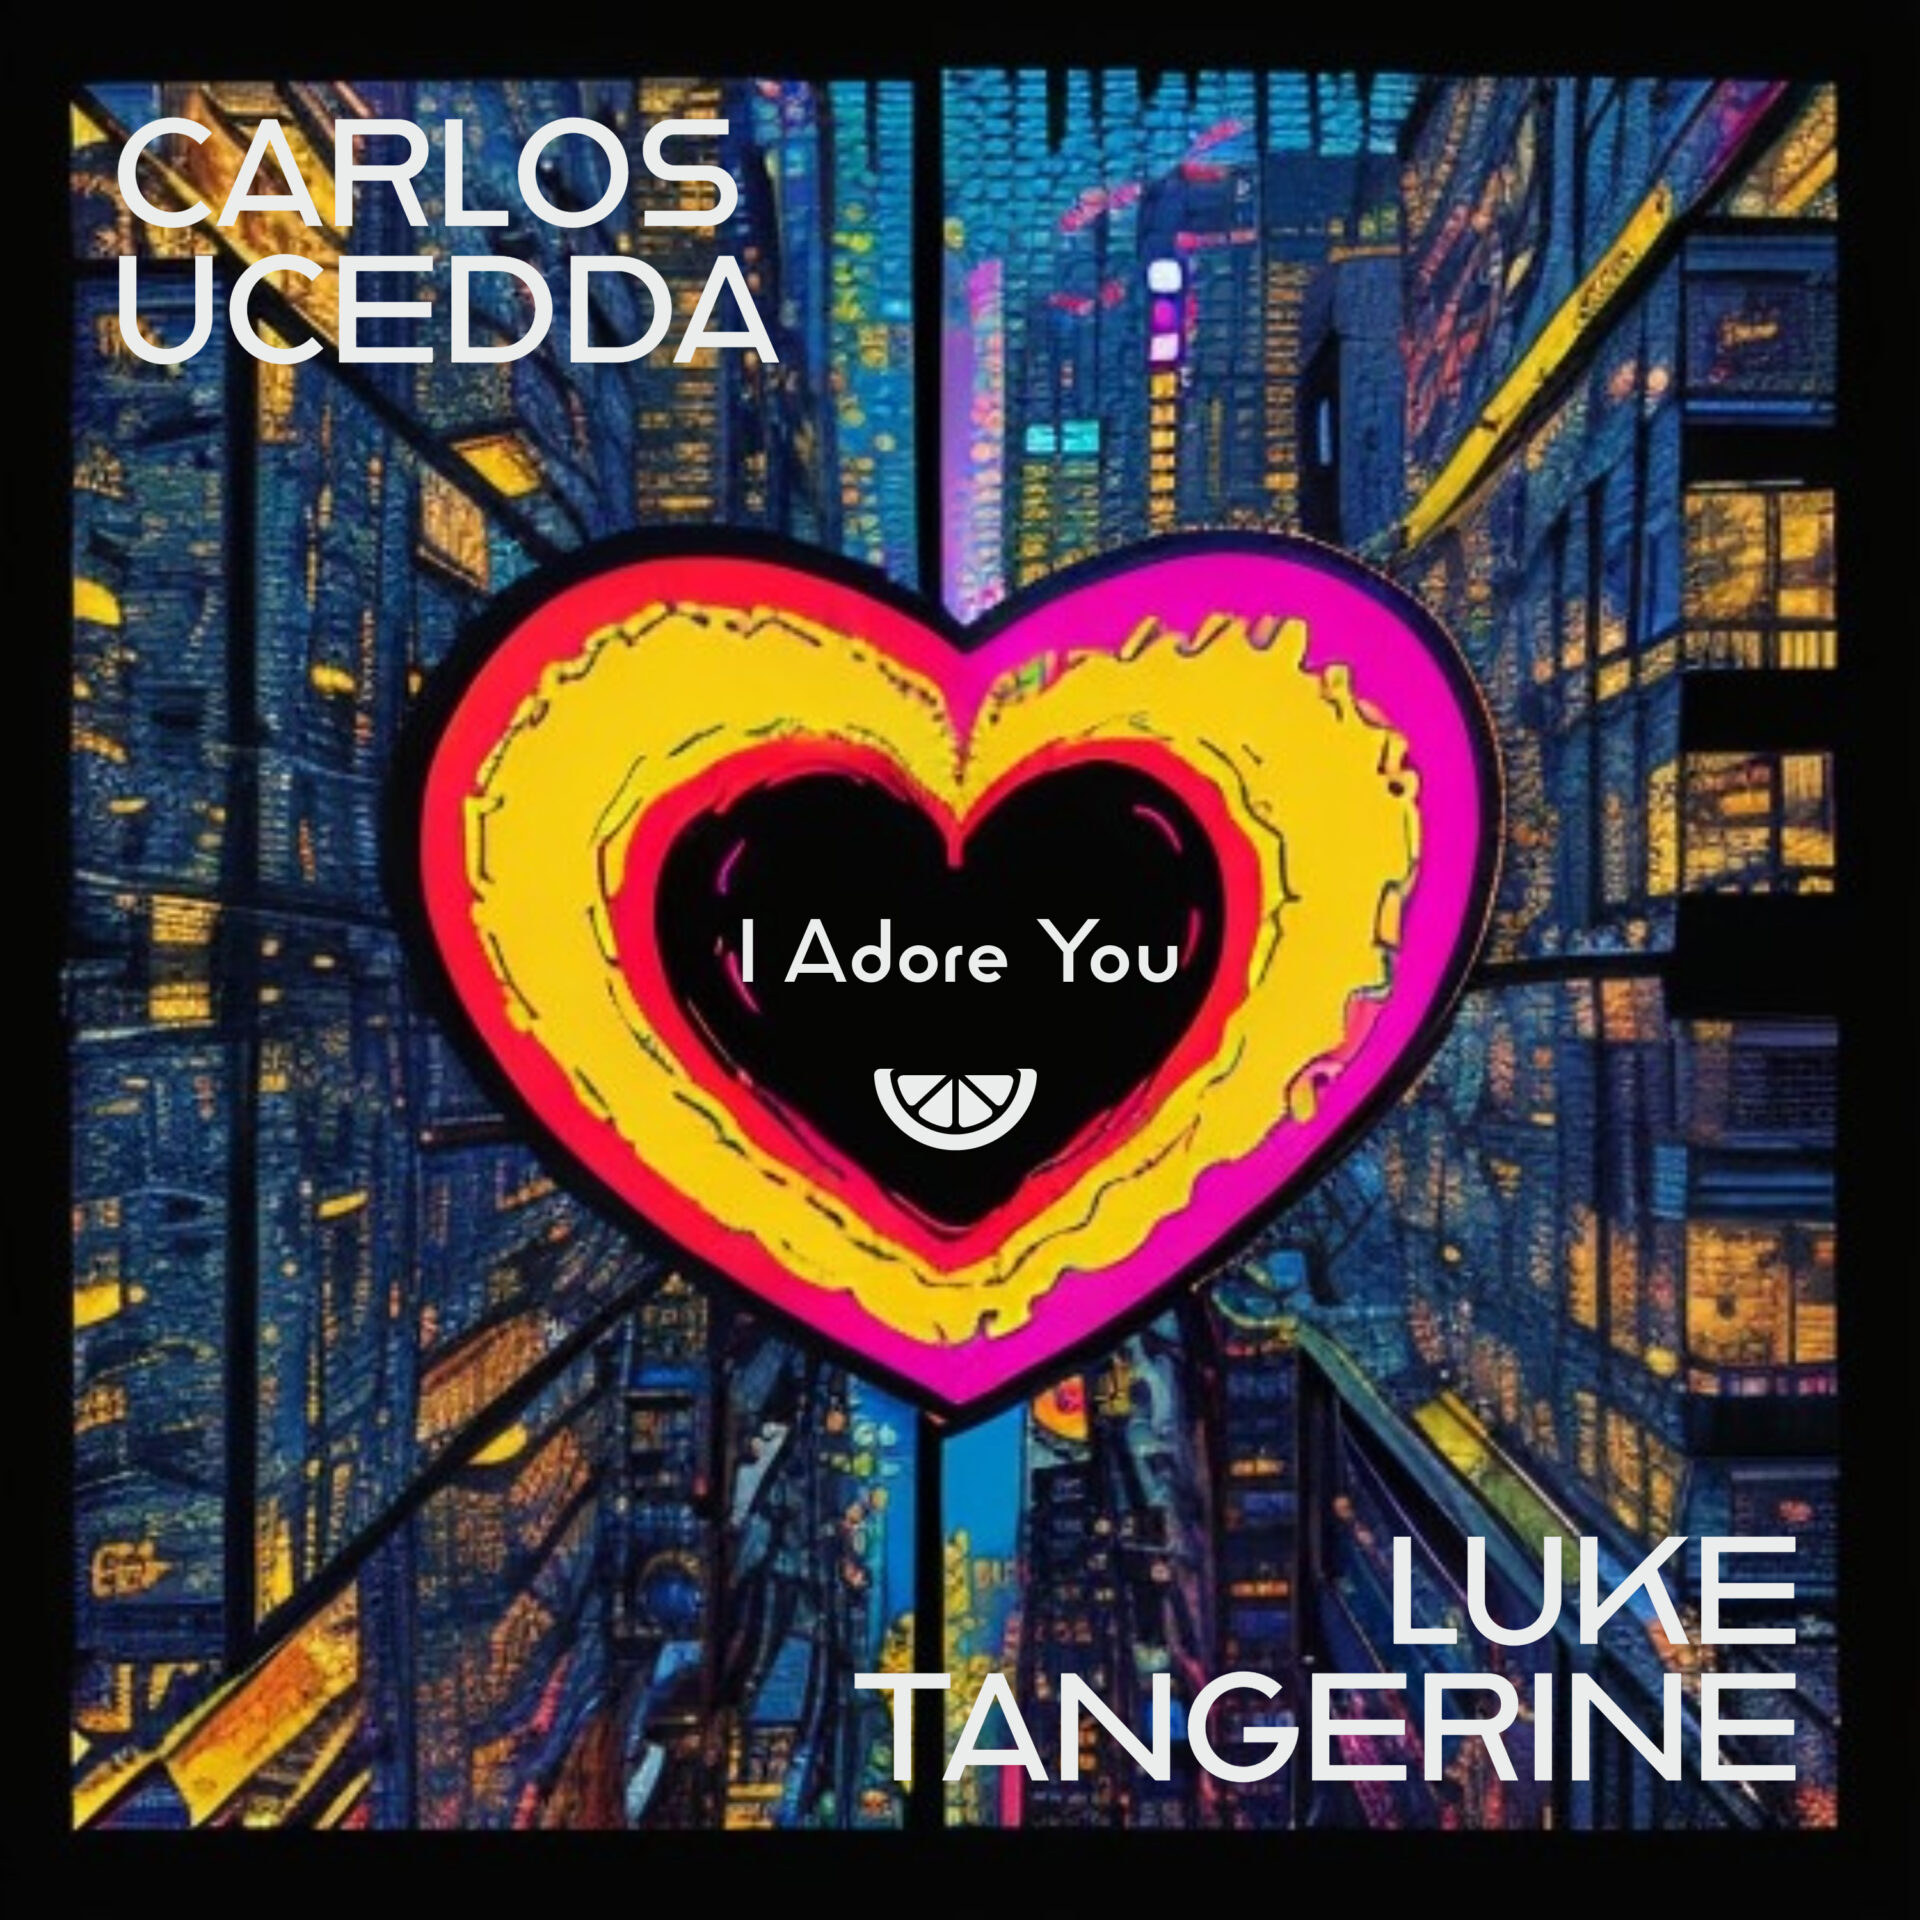 I Adore You (feat. Carlos Ucedda) by LUKE TANGERINE: Review